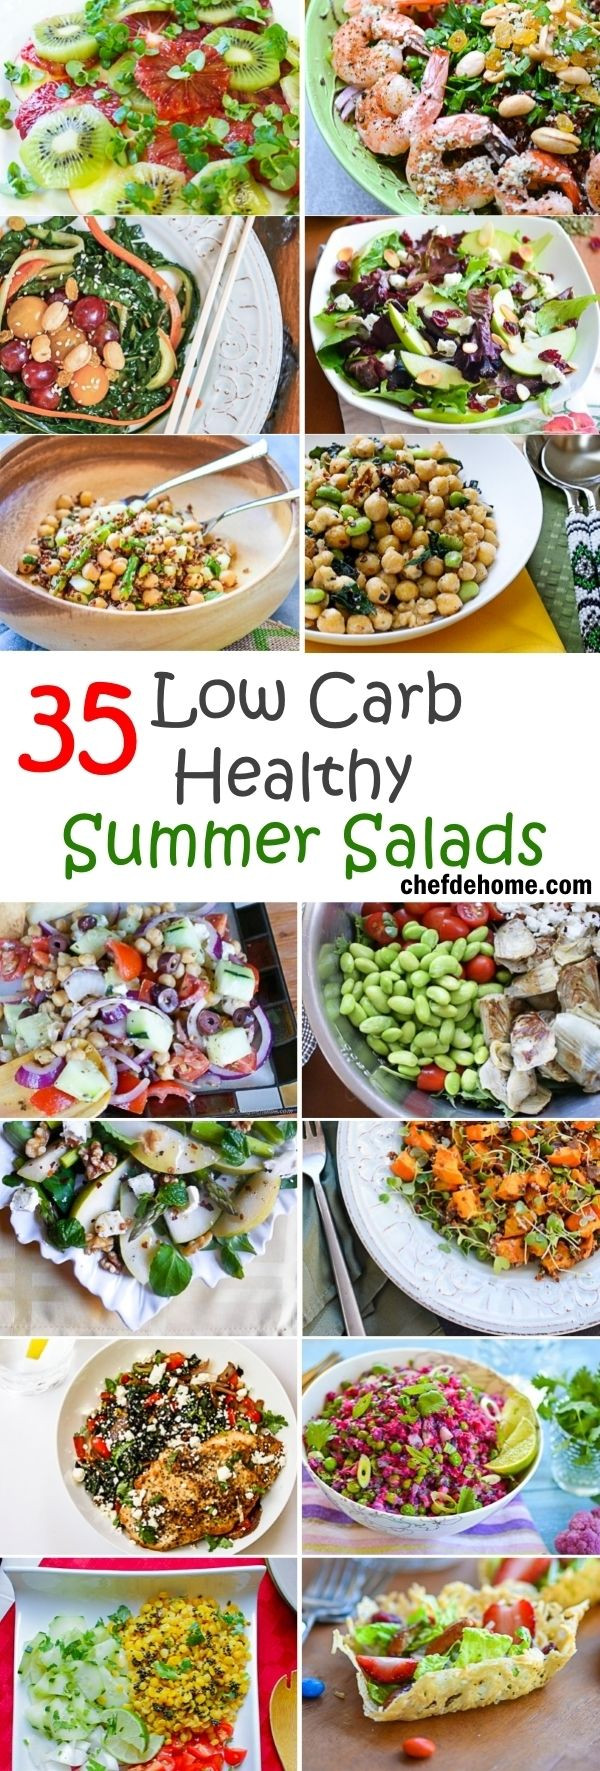 Low Carb Summer Dinners
 35 Low Carb Healthy Summer Salads